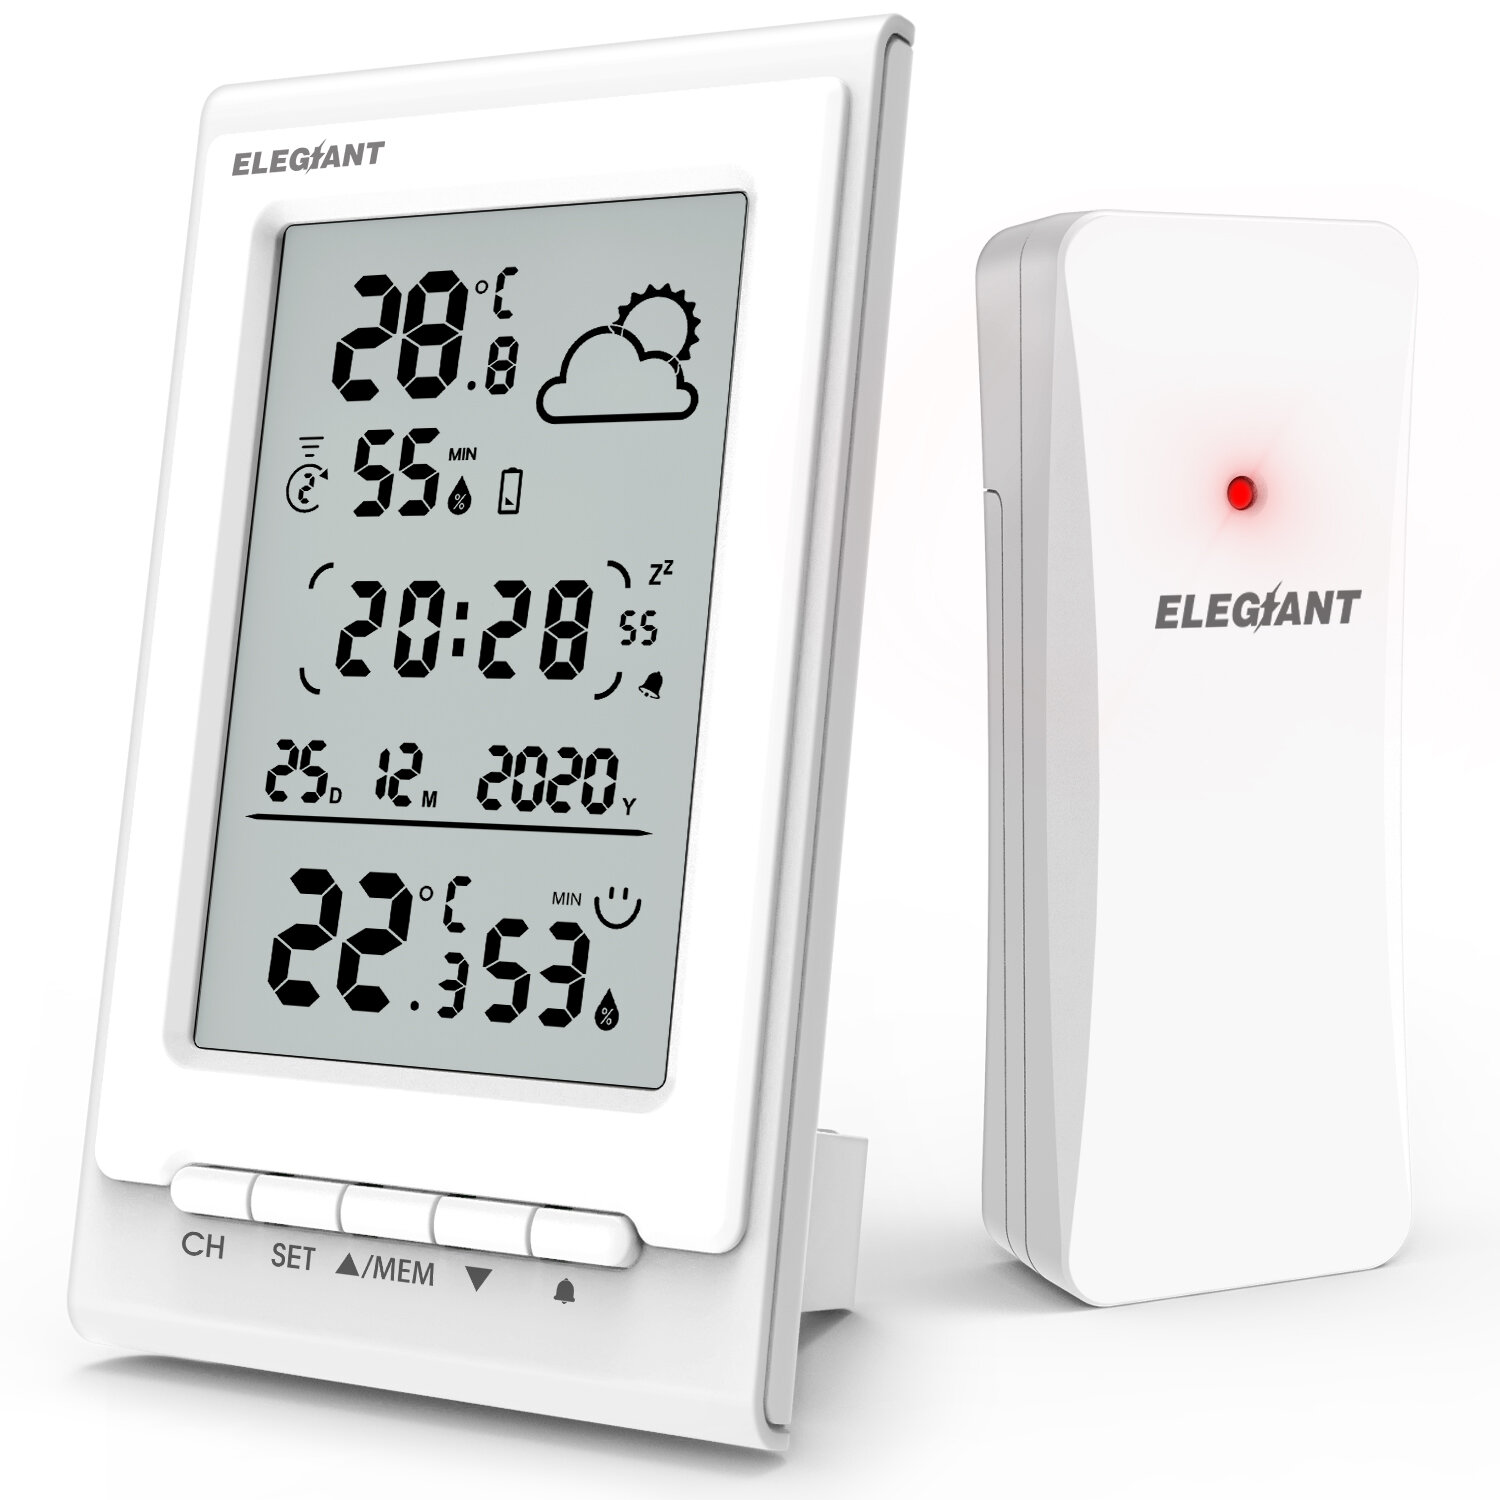 best price,elegiant,eox,electronic,thermometer,hygrometer,eu,discount